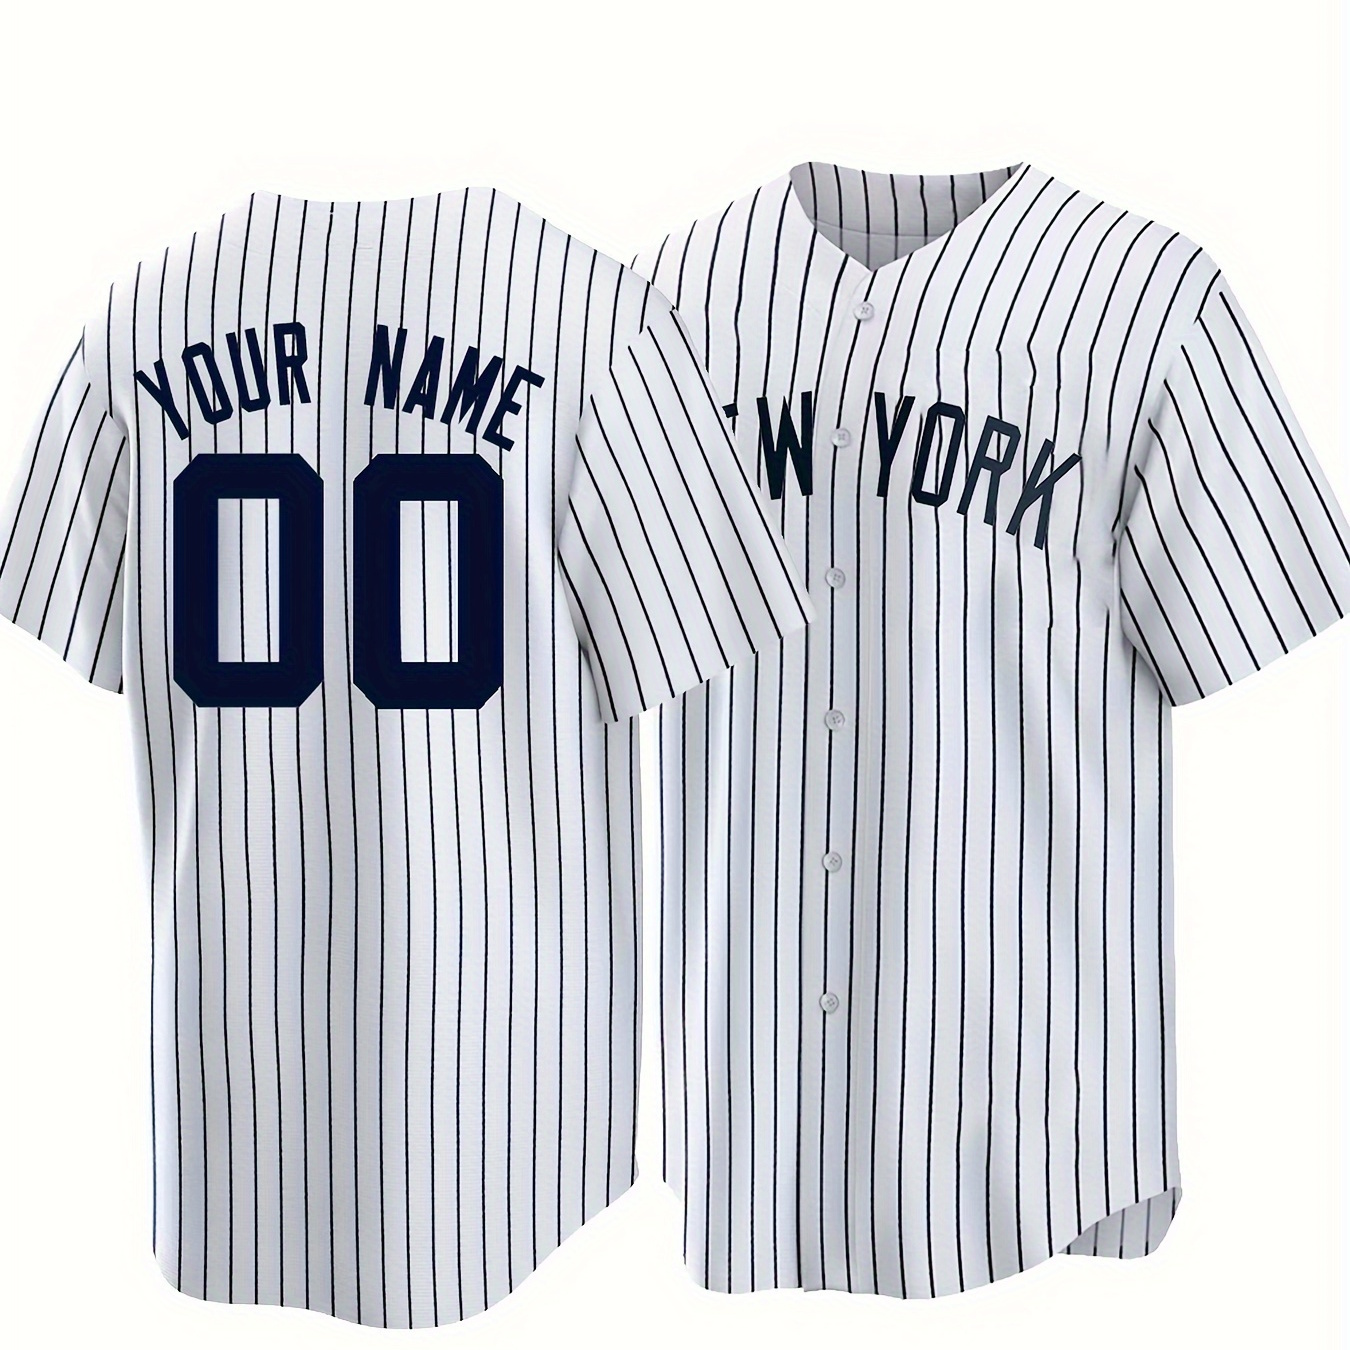 

Customized Name And Number, Men's Striped Baseball Jersey, Outdoor Daily Leisure Sports Shirt